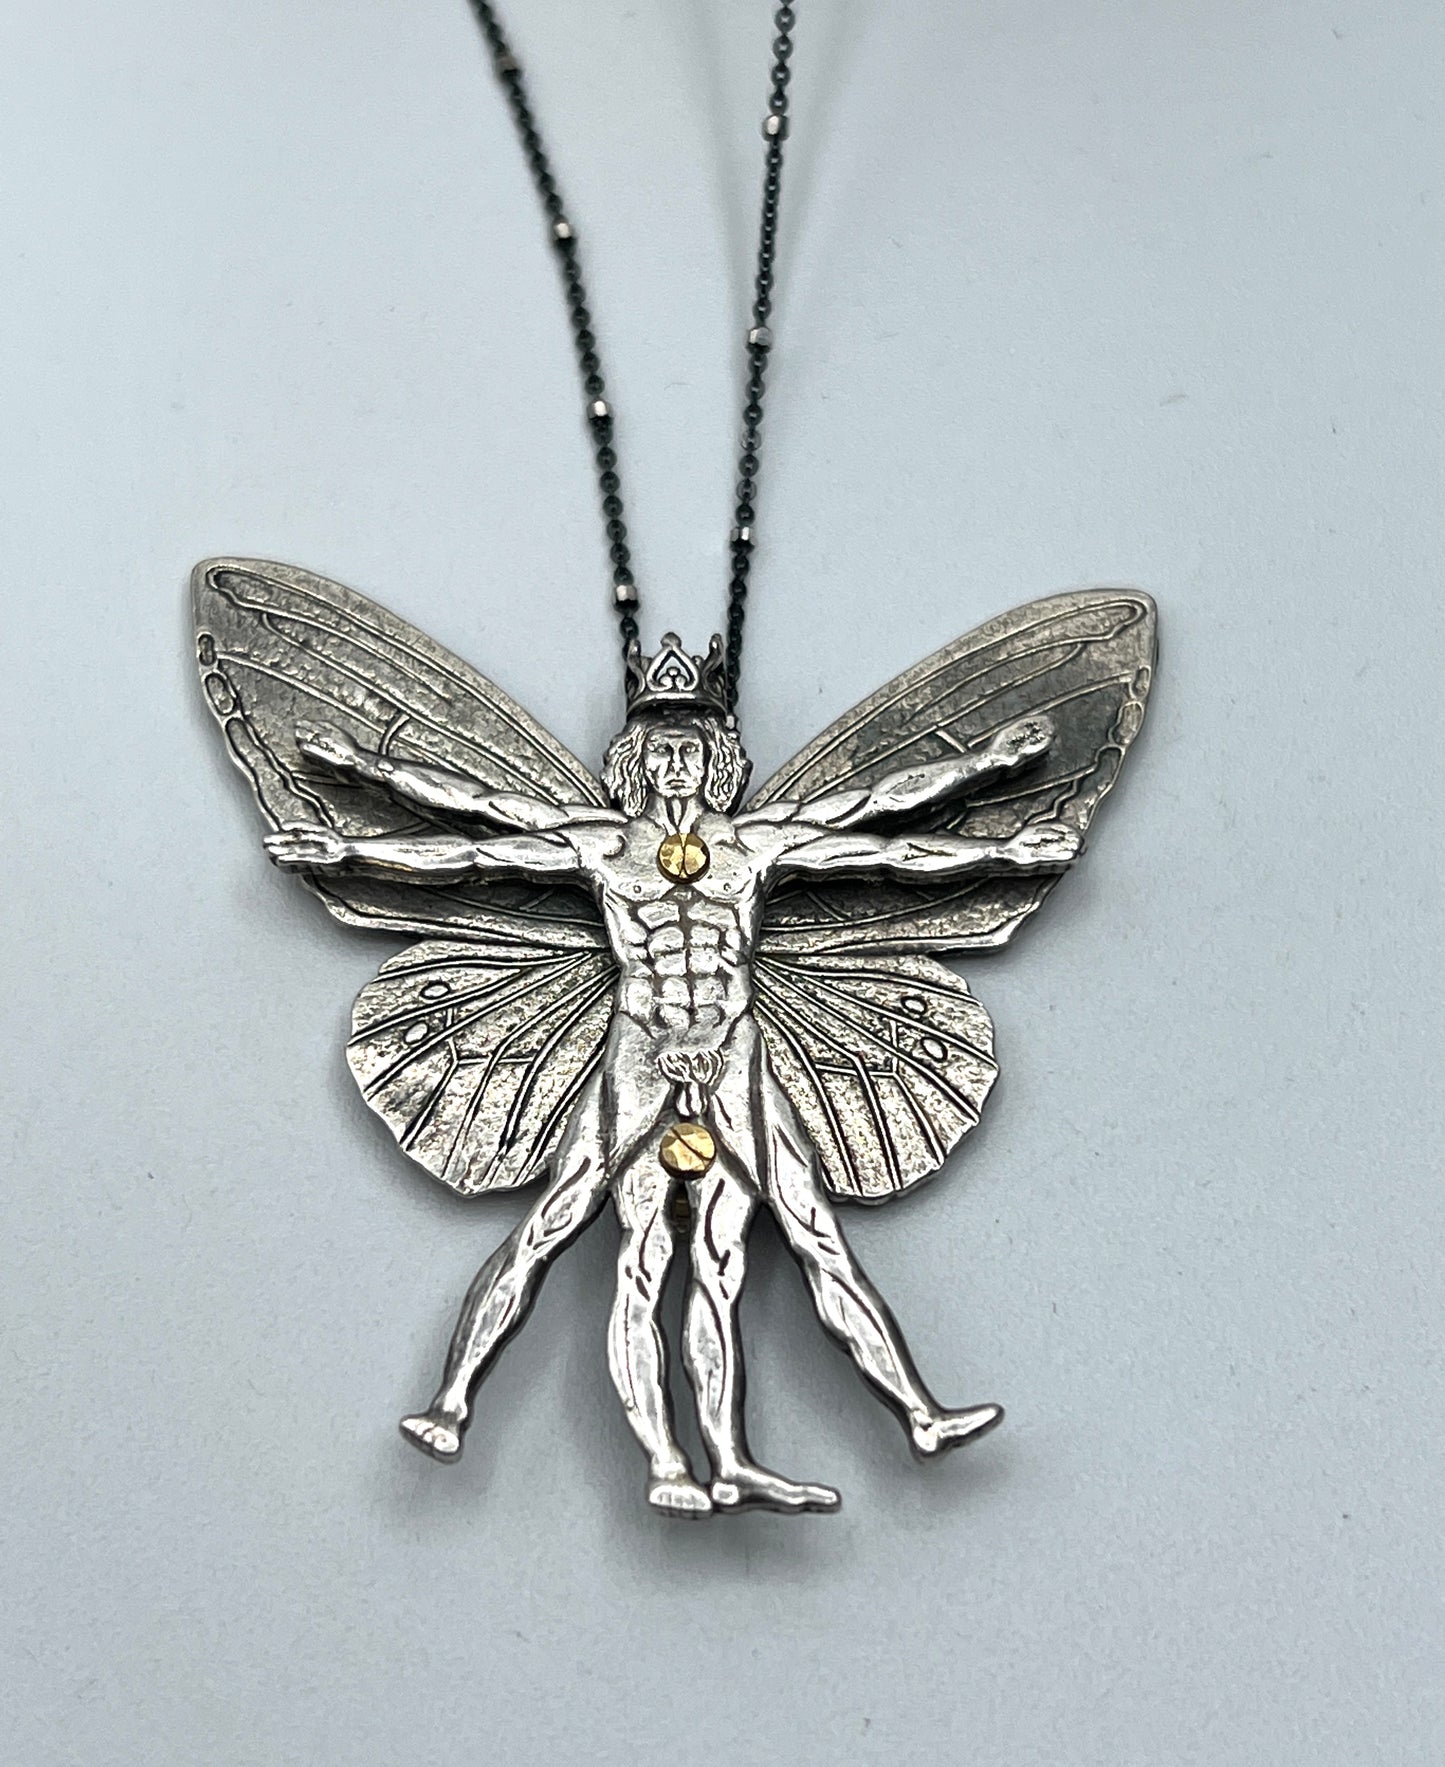 Winged Character Necklaces by Carlos Montanaro & Crystal Rivera